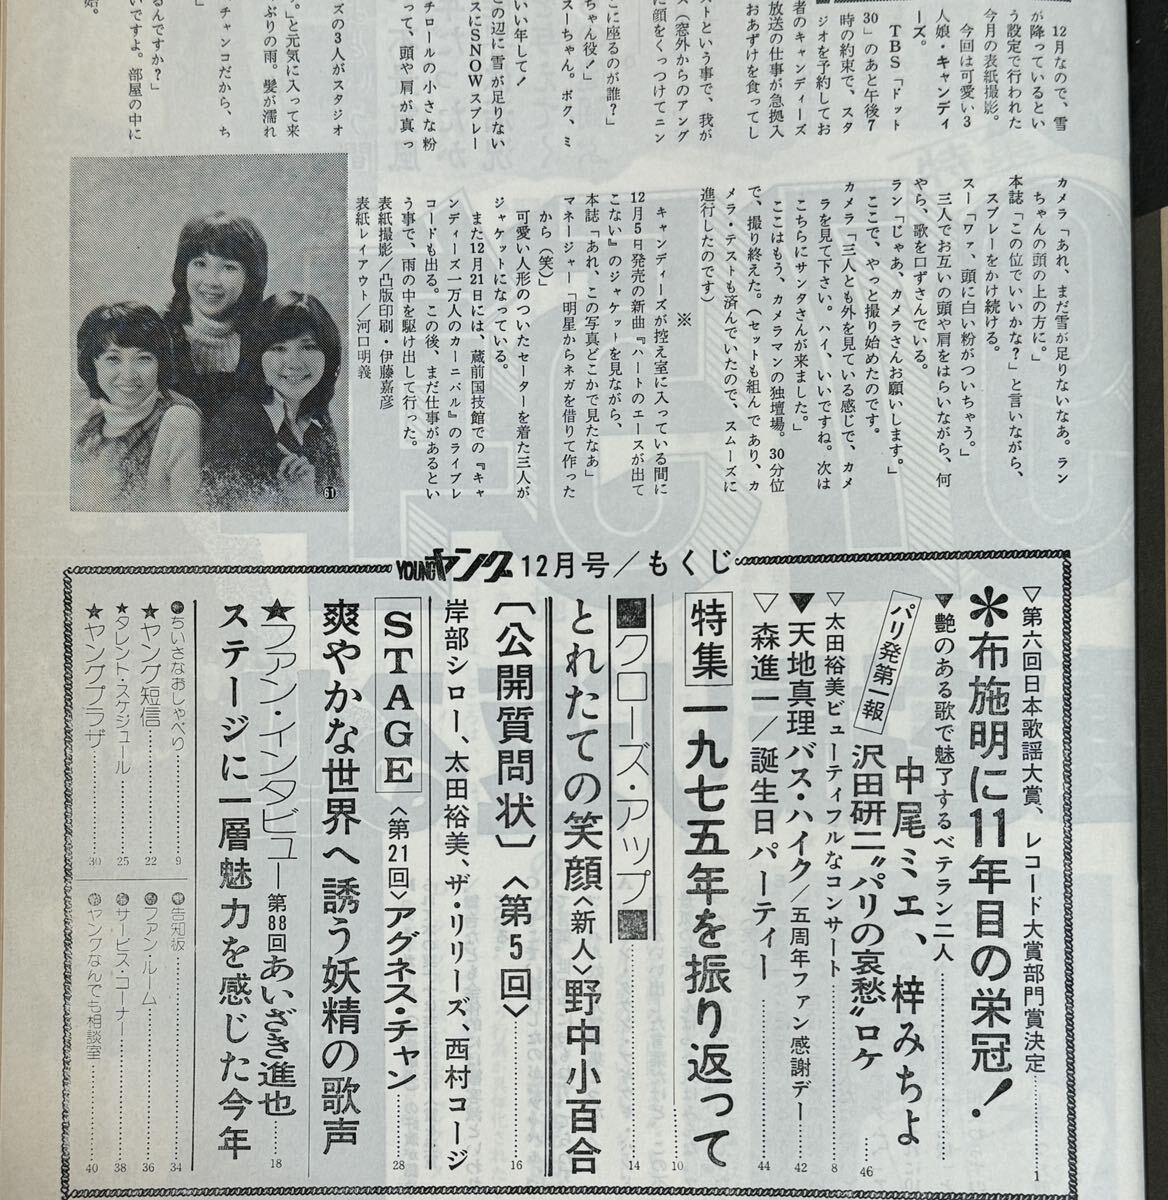 YOUNGヤング　4冊セット　'75-2 ‘75-12 '77-01 '77-08 #キャンディーズ#ドリフターズ#太田裕美#布施明#沢田研二#天地真理#森進一_画像4